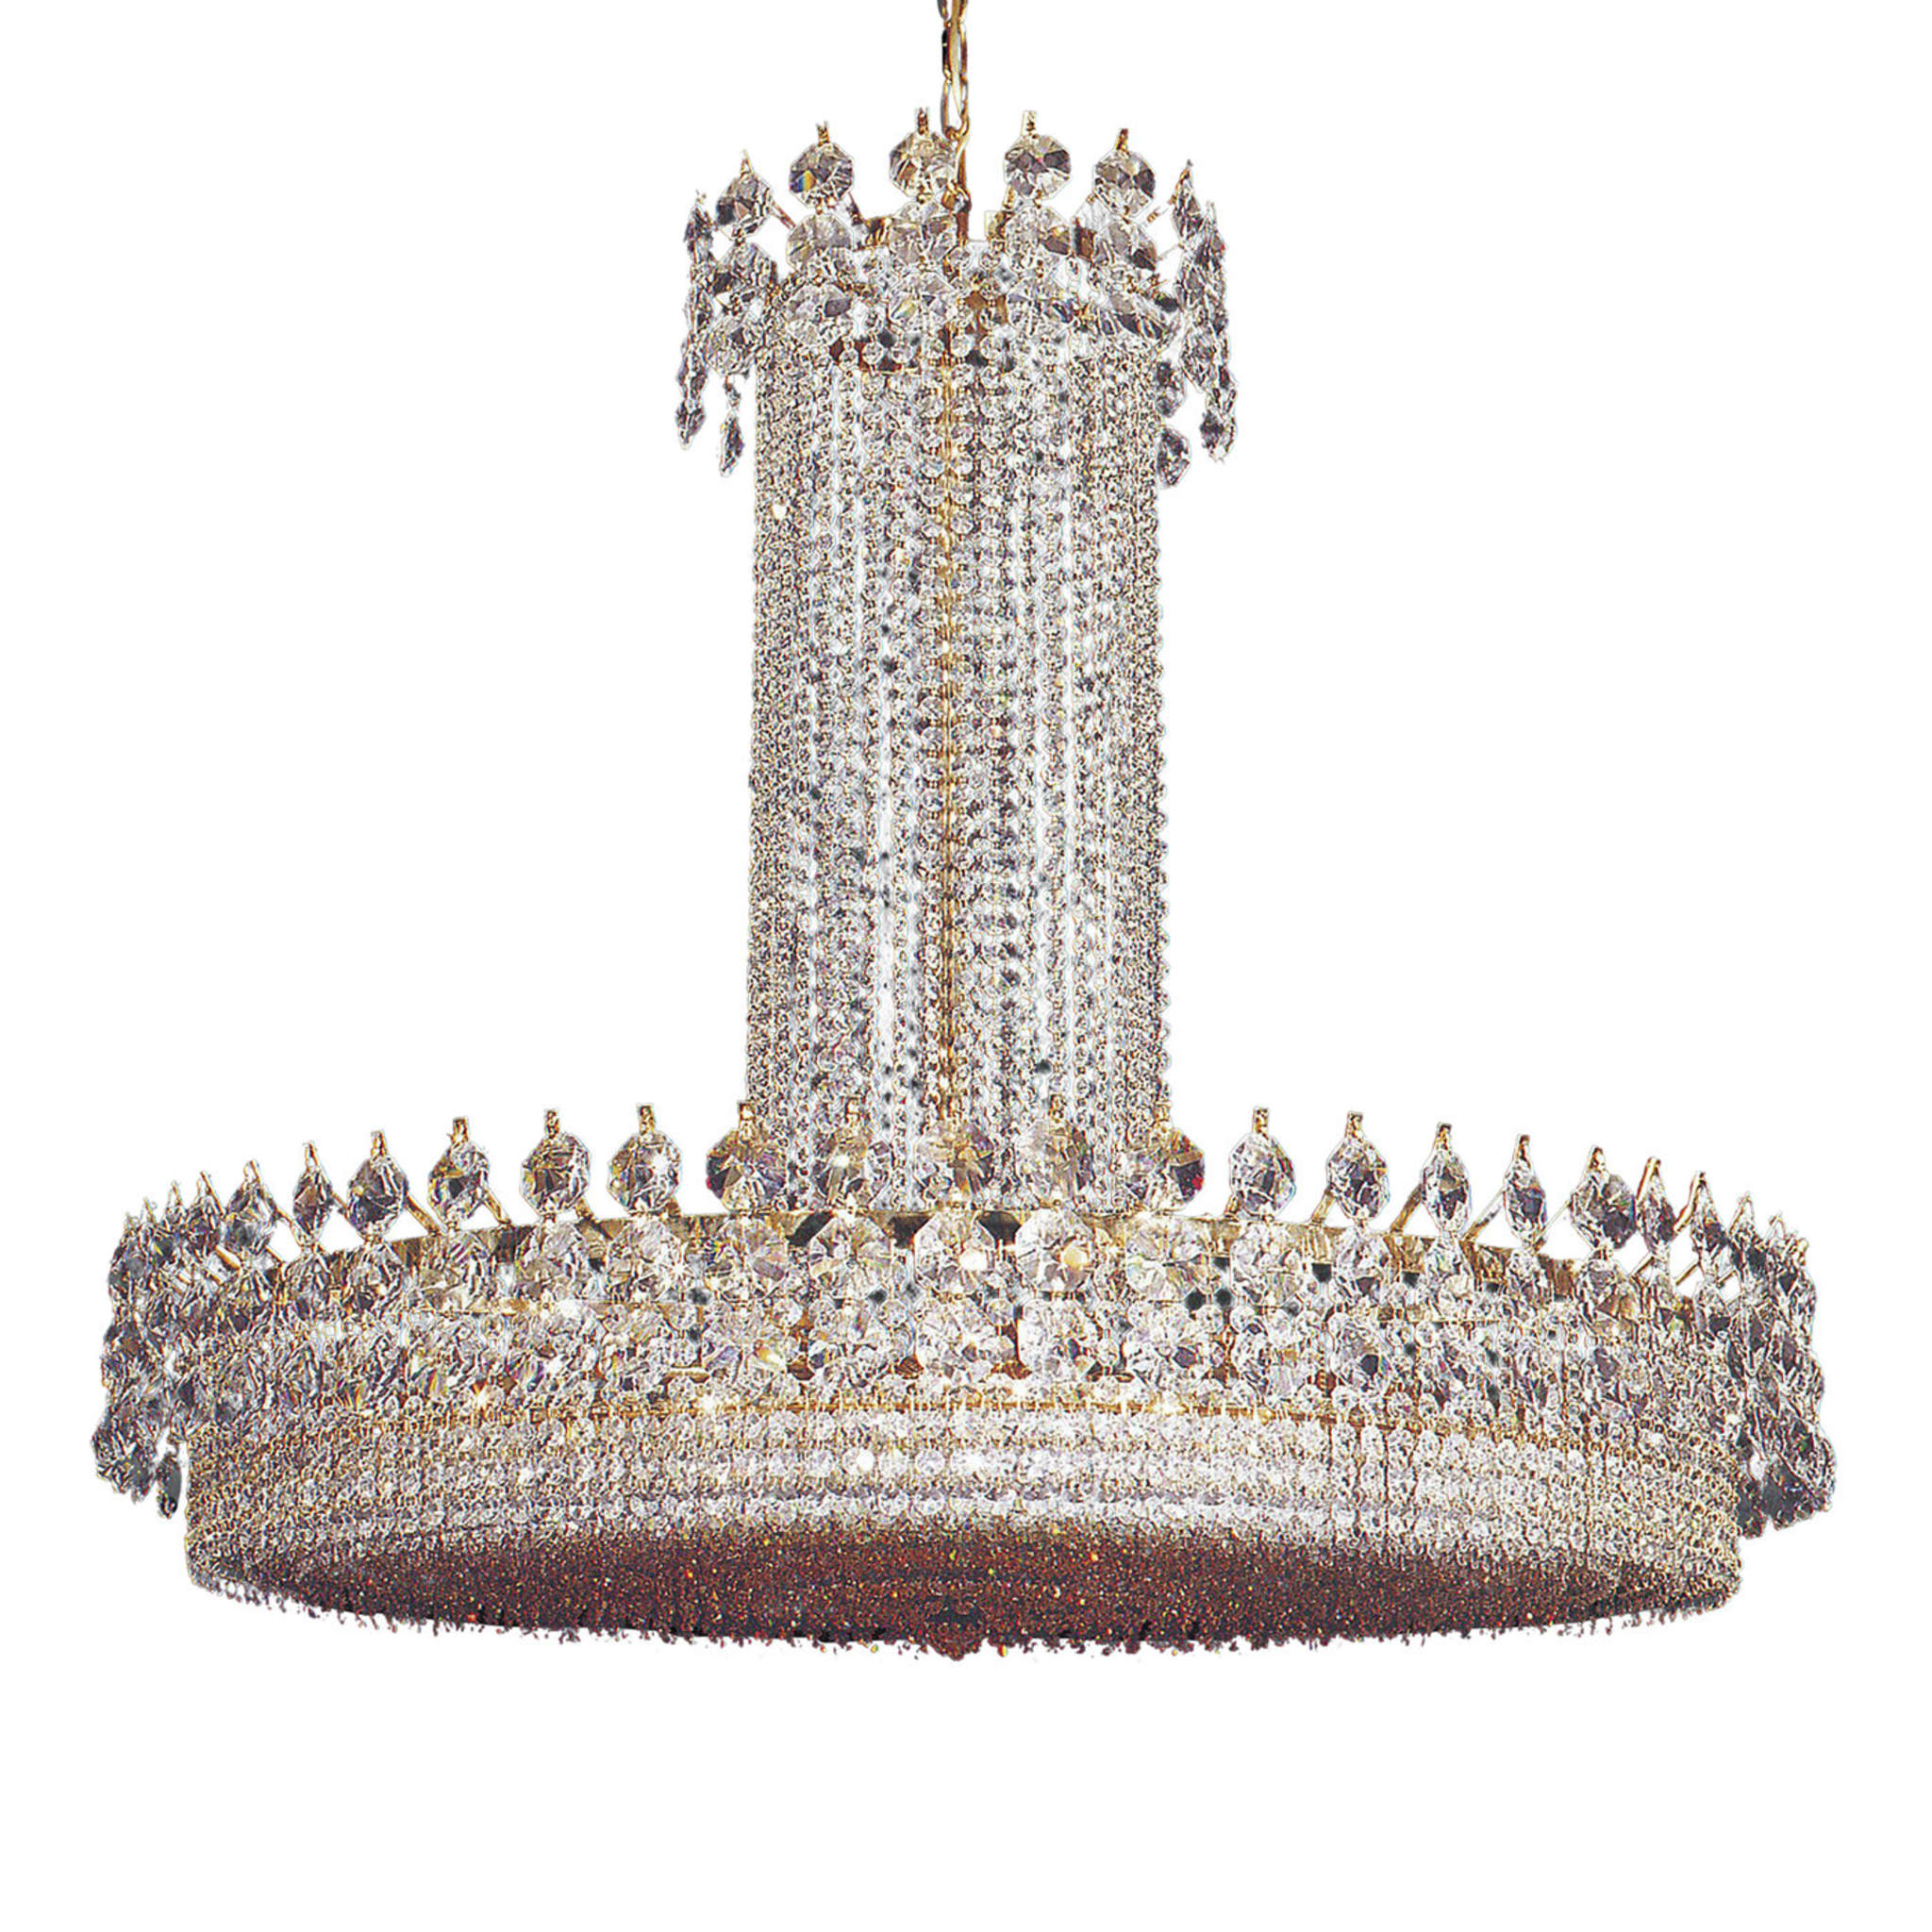 Impero 22-Light Chandelier - Main view